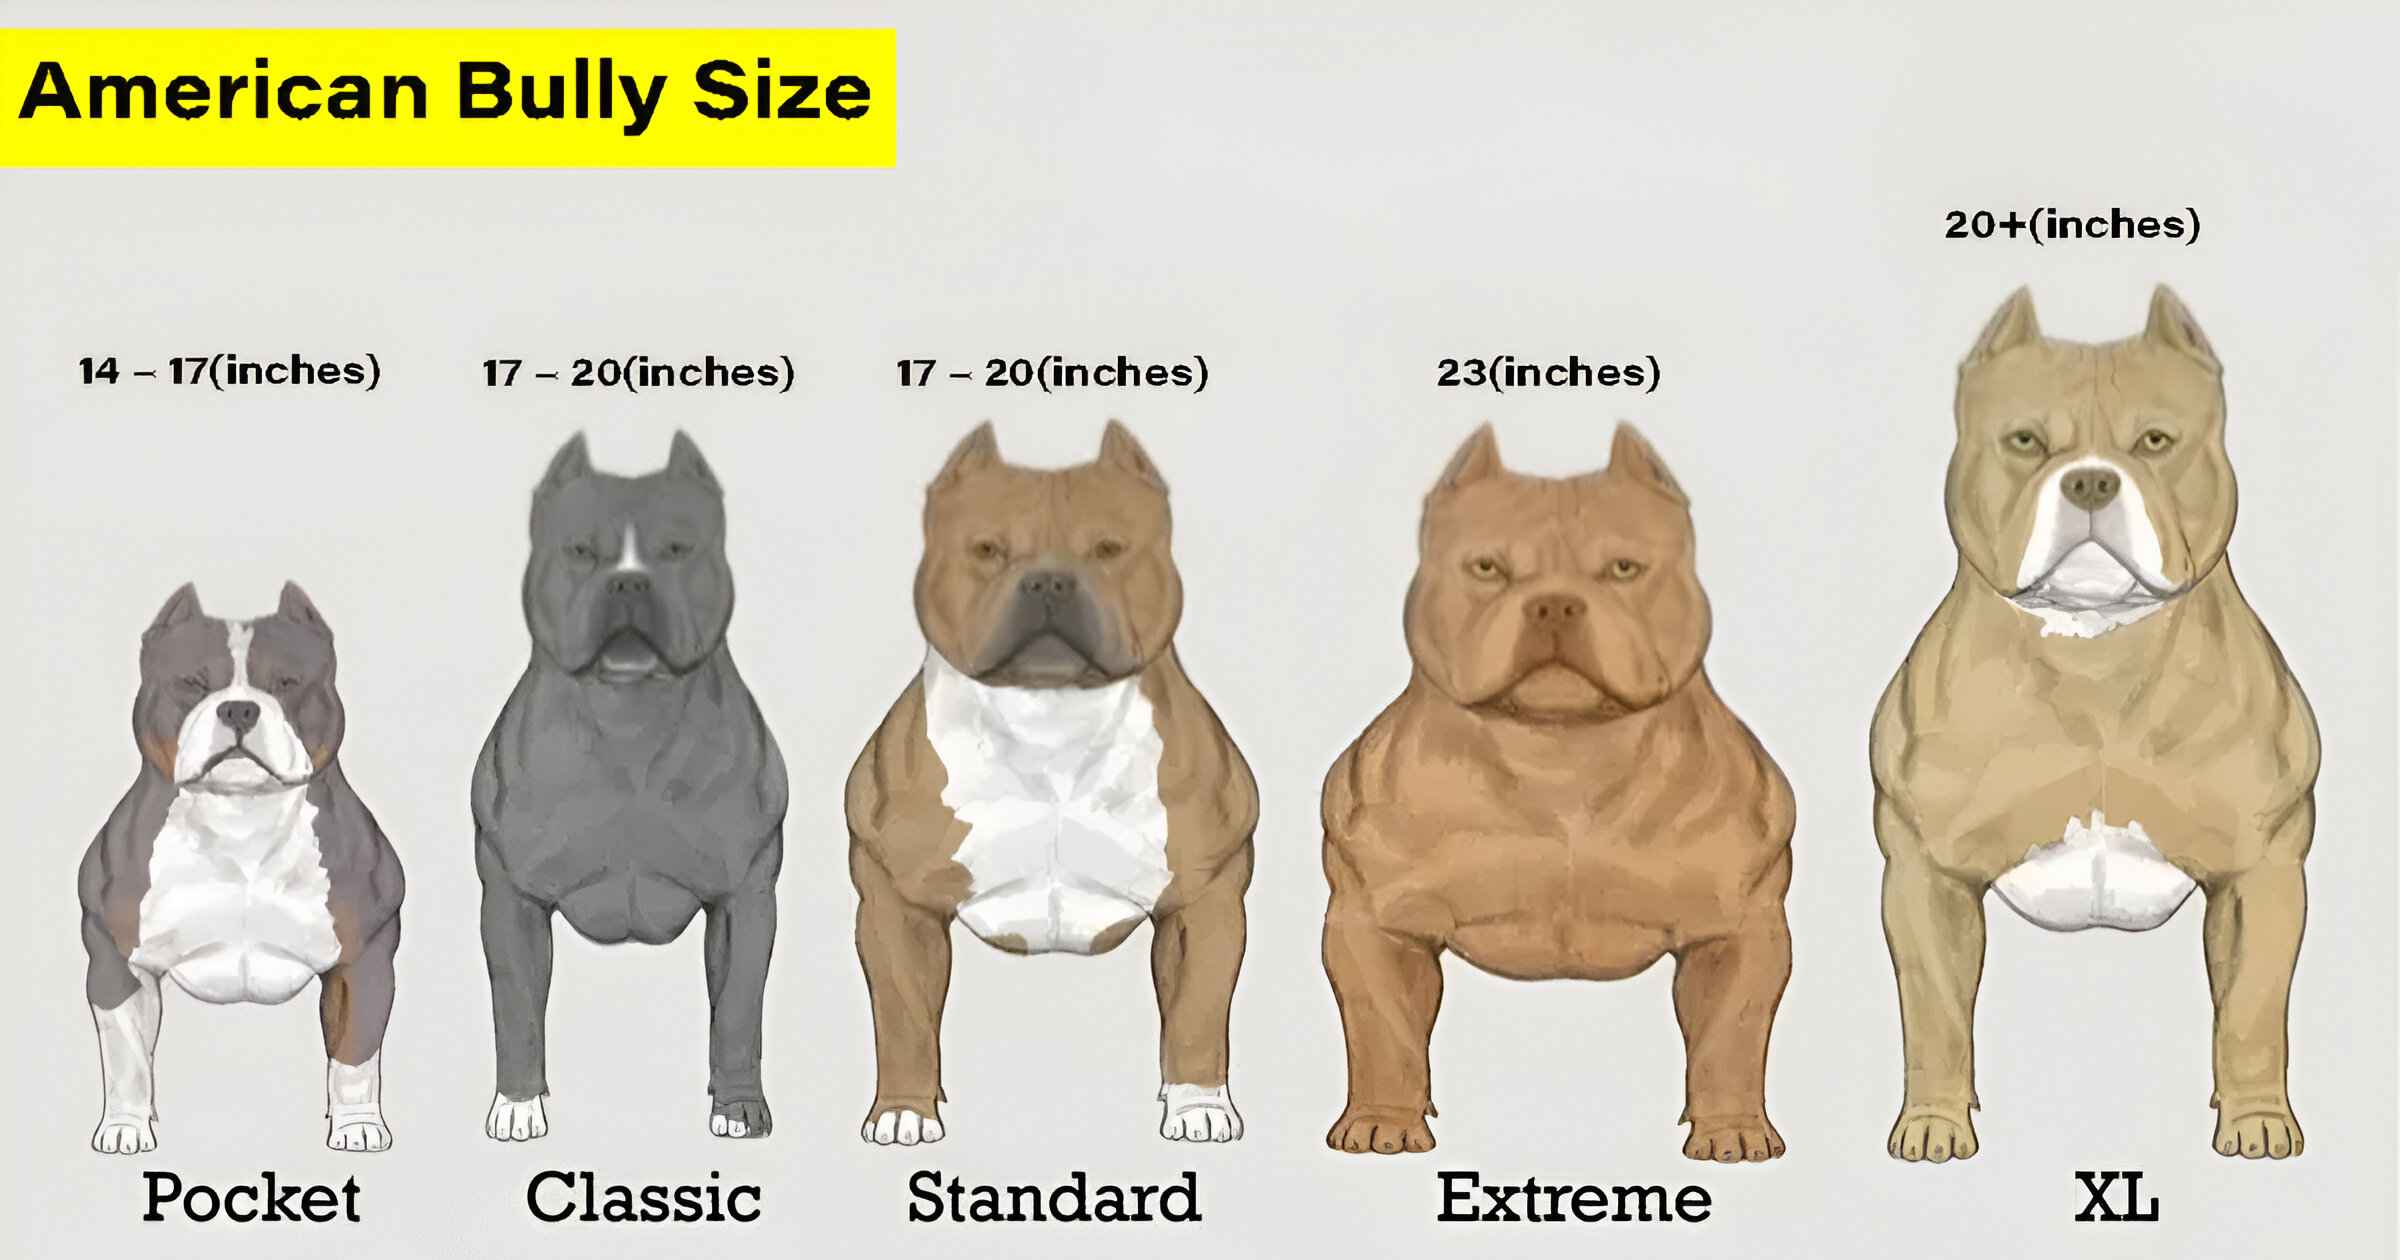 American bully size